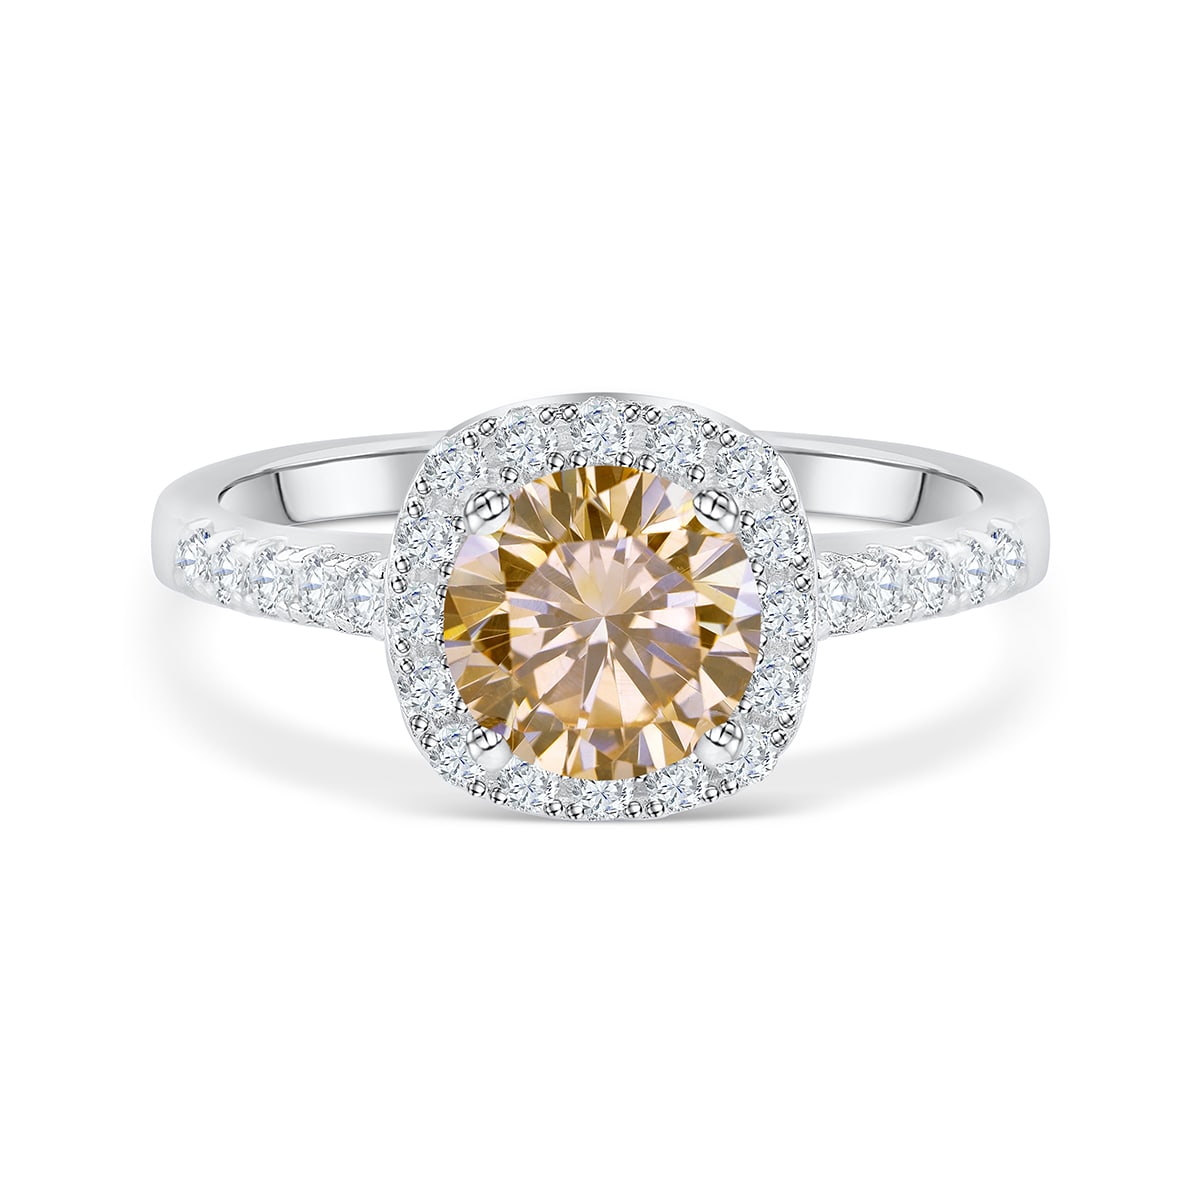 the halo engagement ring with morganite stone